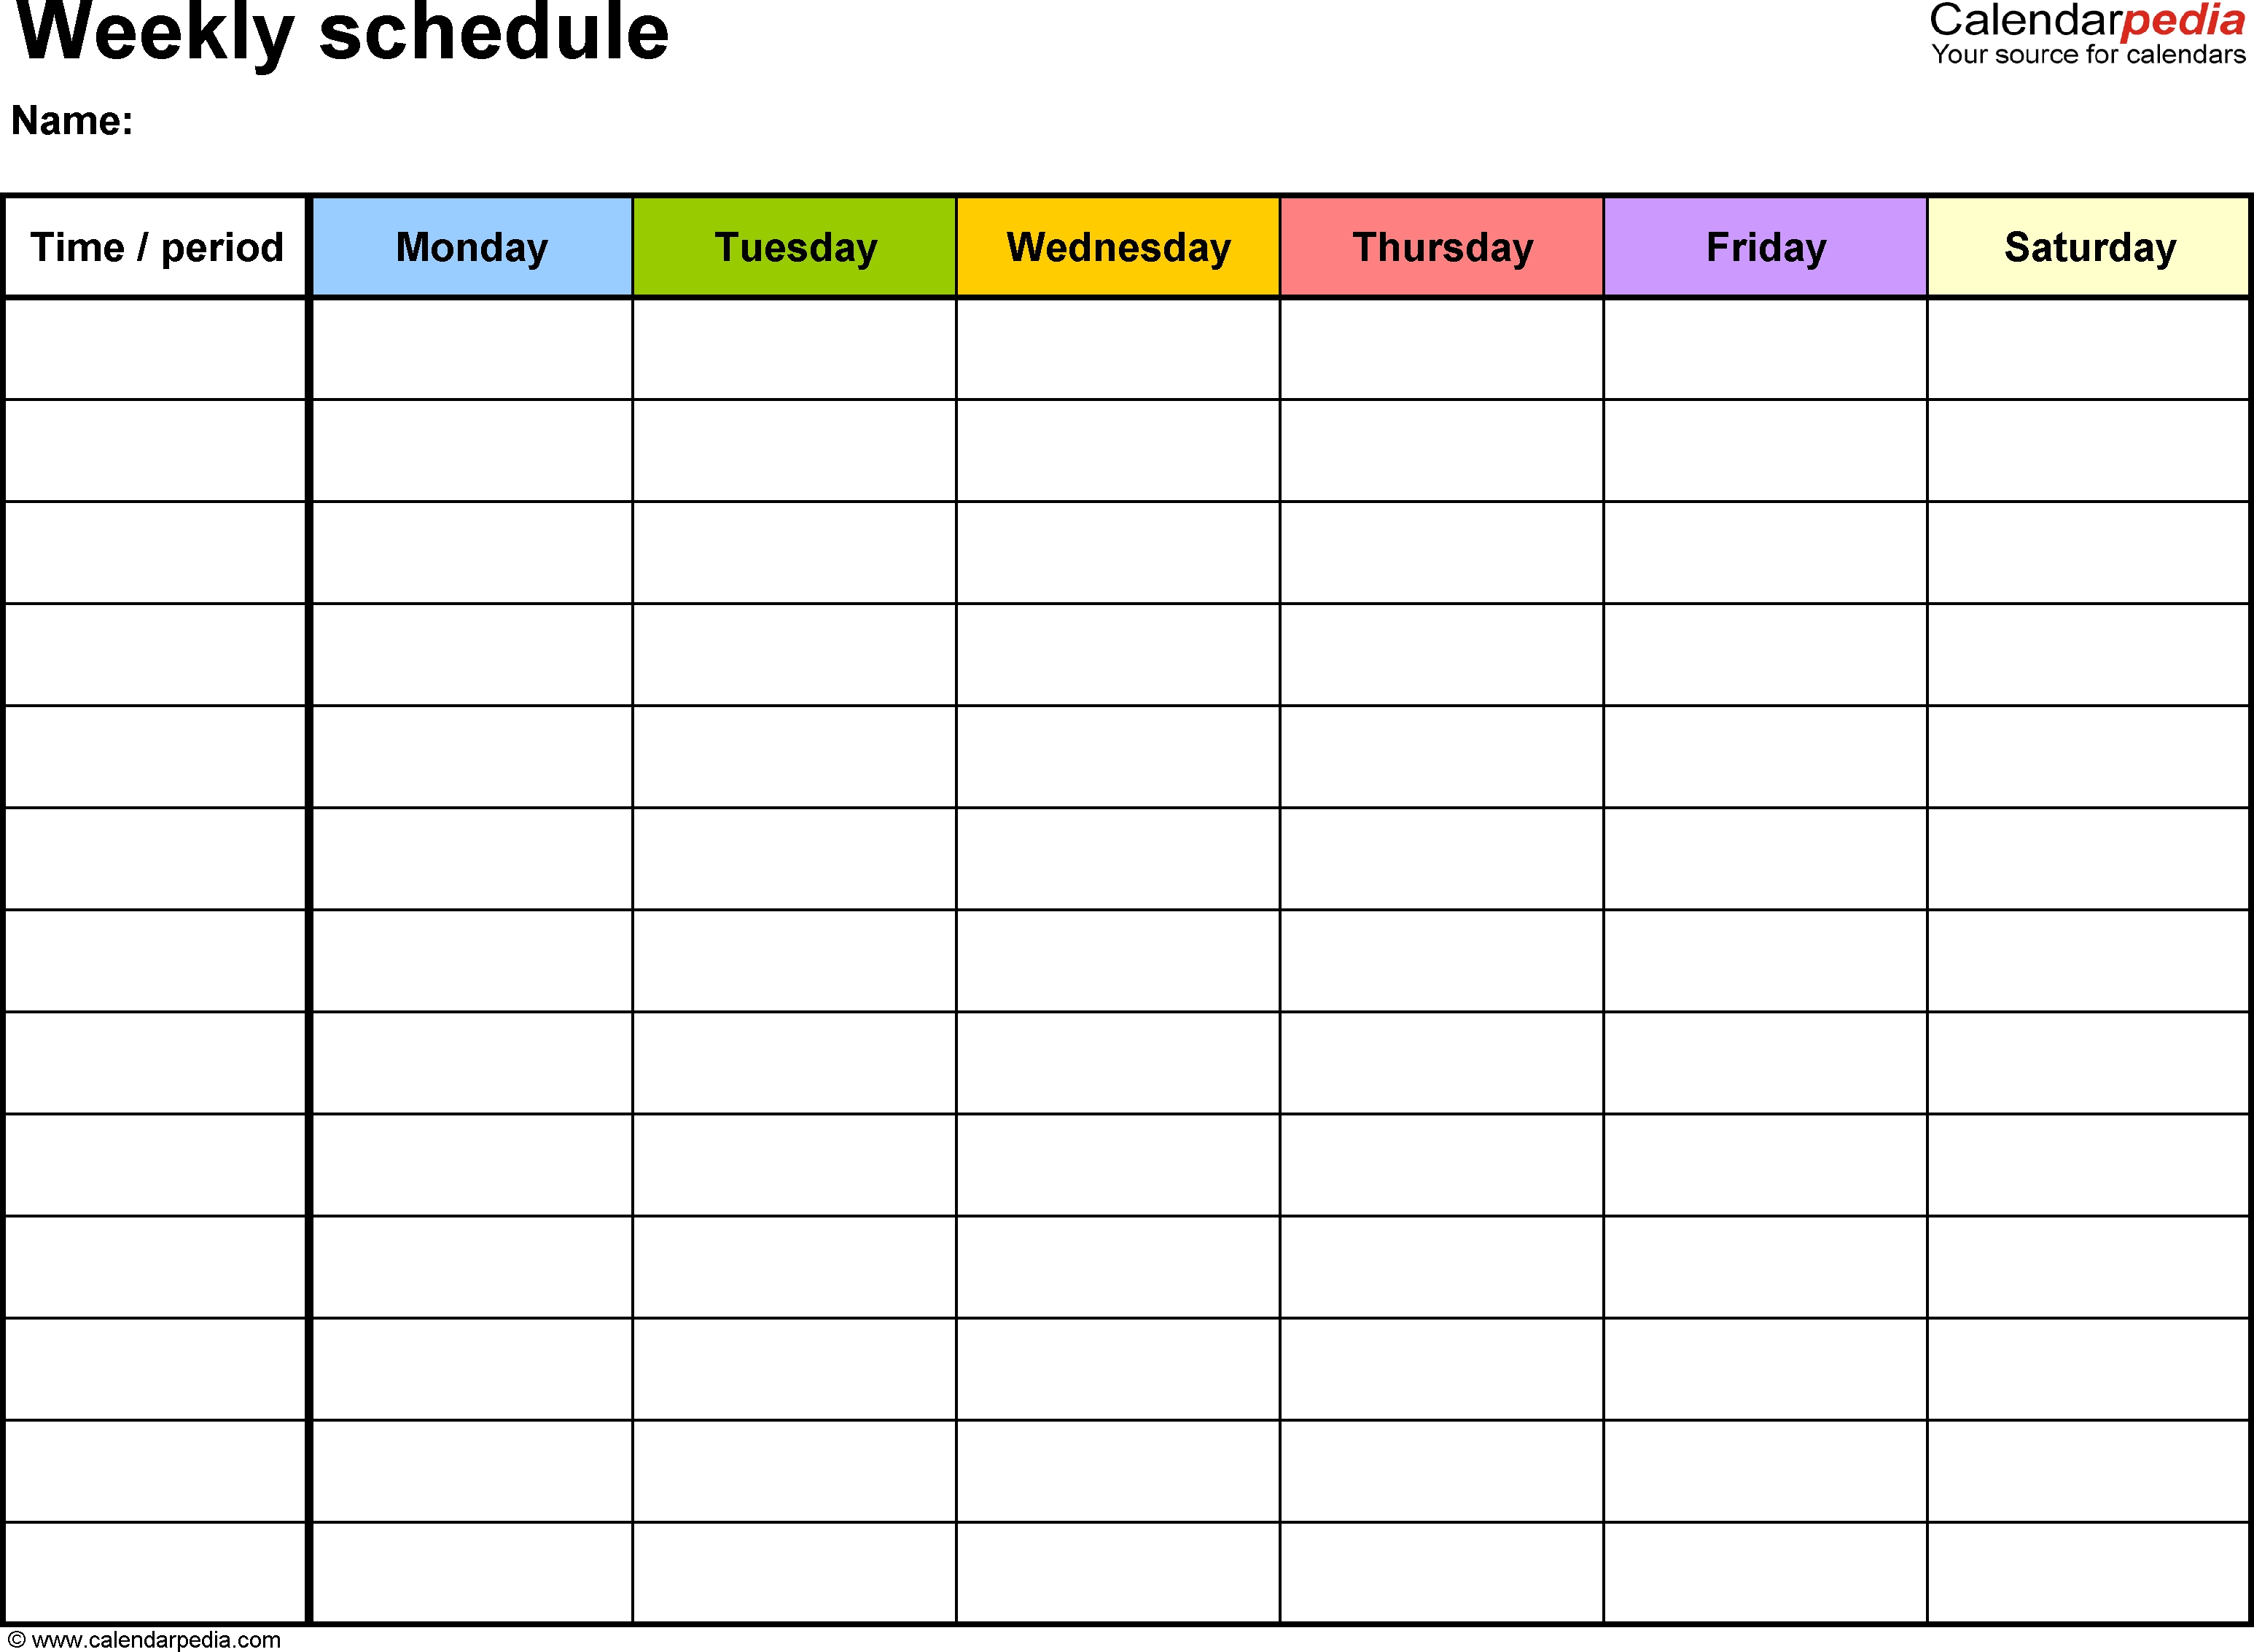 Weekly Schedule Template For Word Version 7: Landscape, 1  7 Day Weekly Chart Printable